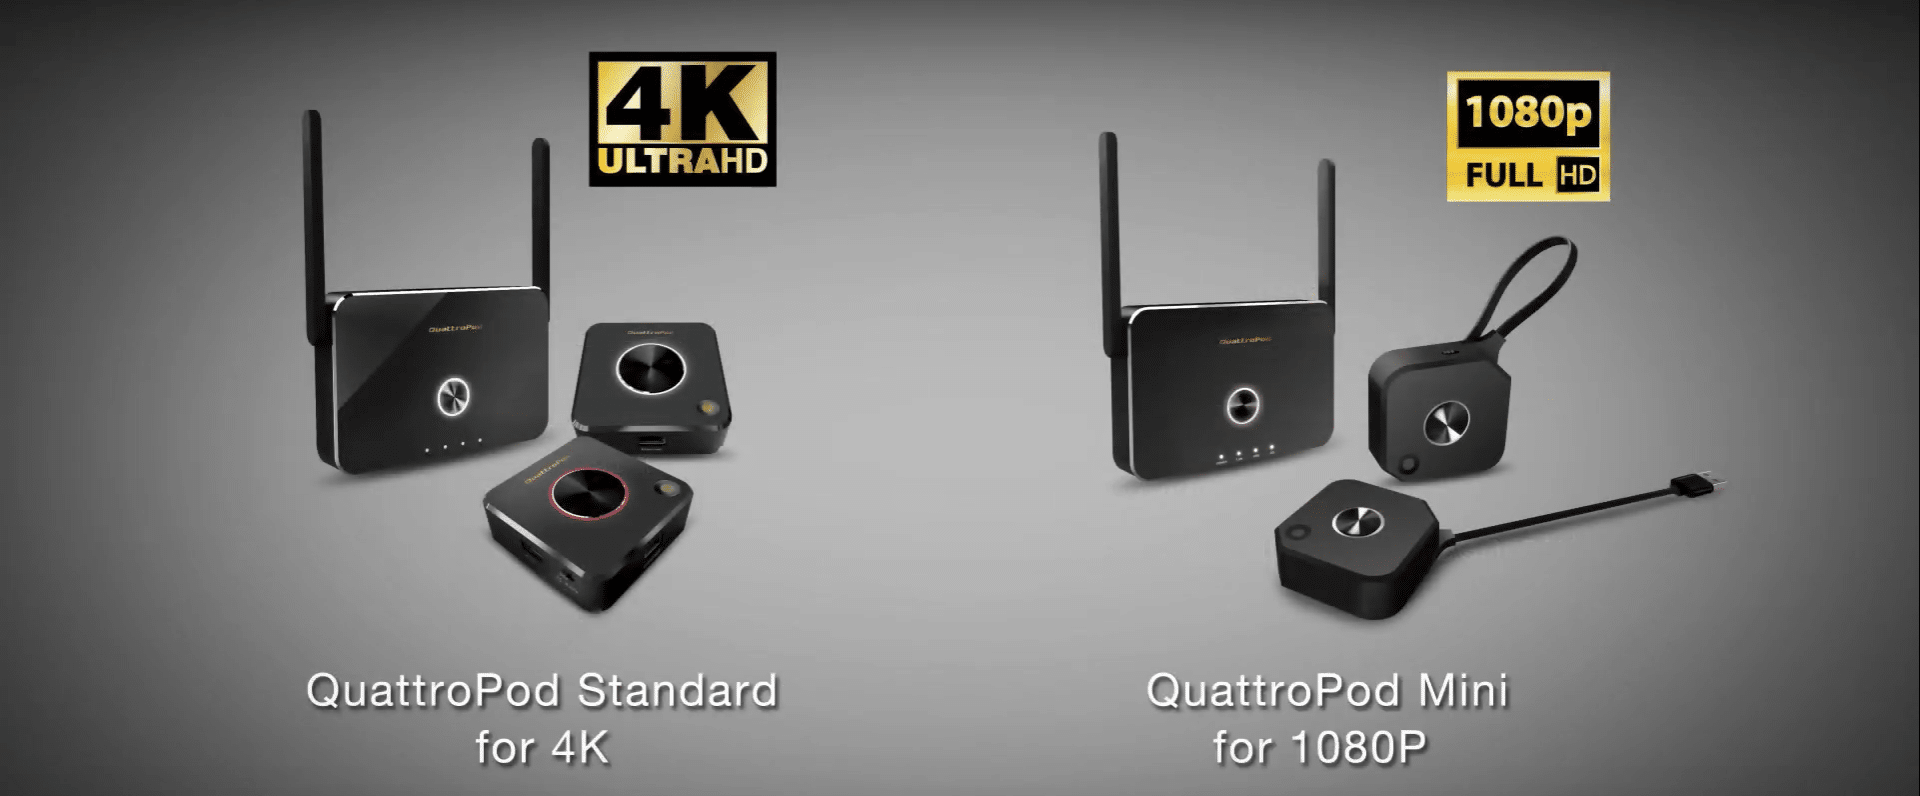 QuattroPod Standard supports 4K resolutions and QuattroPod Mini supports 1080P resolutions that fulfill different user’s needs.